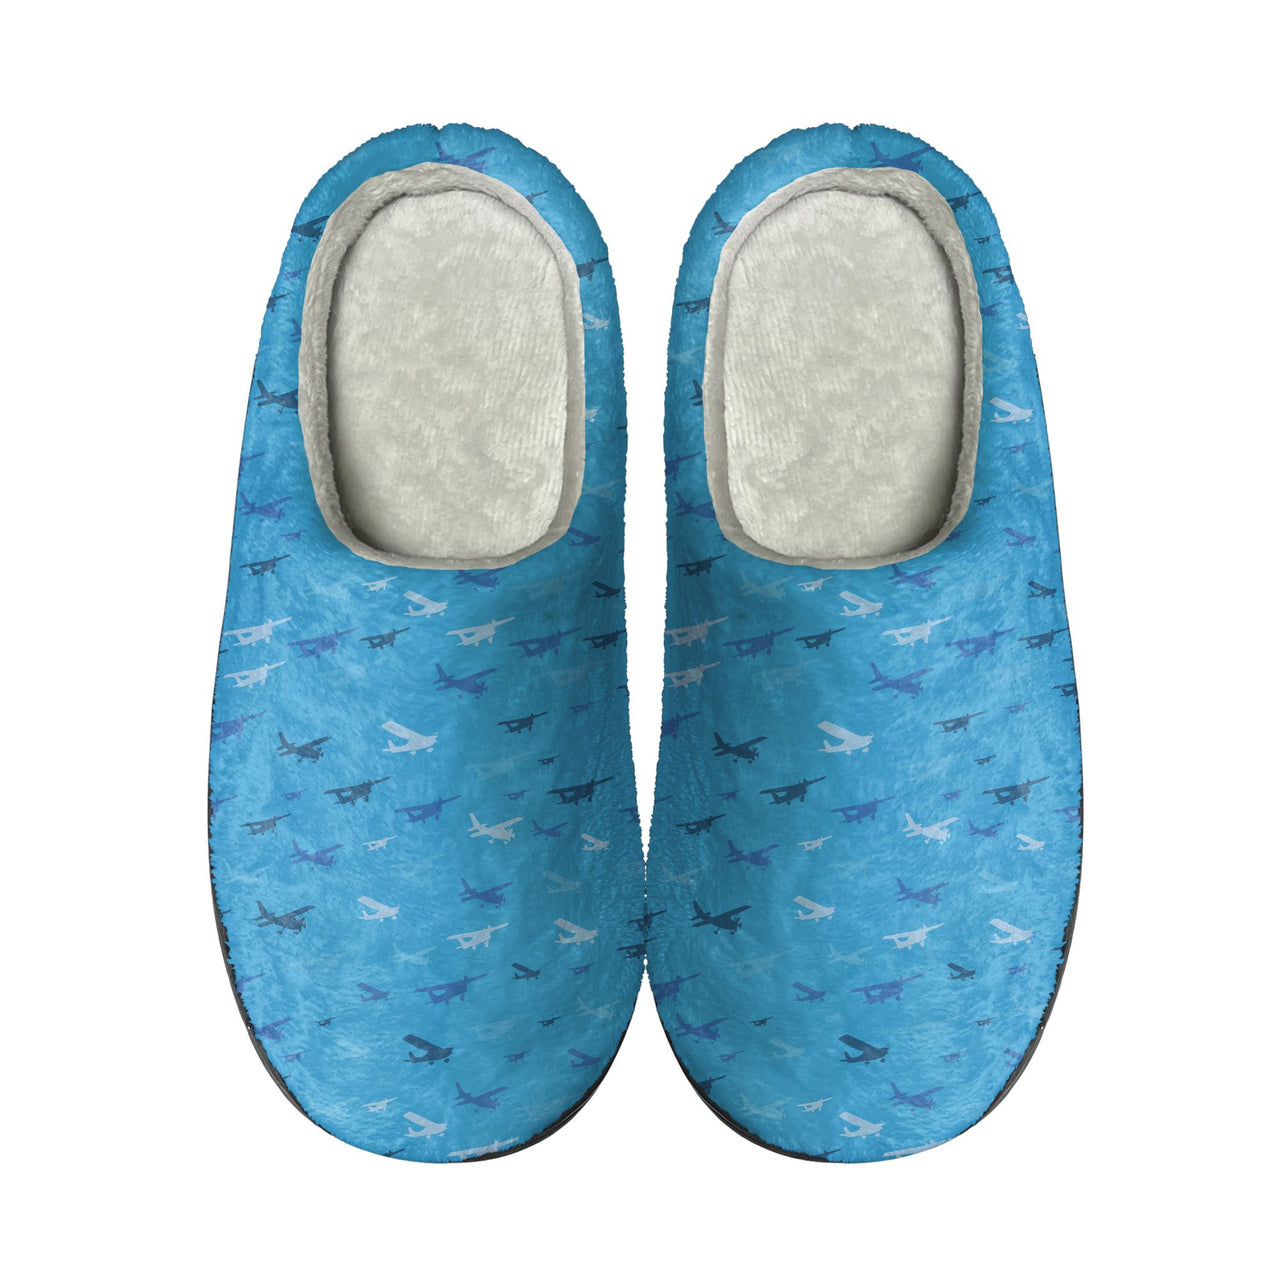 Many Propellers Designed Cotton Slippers